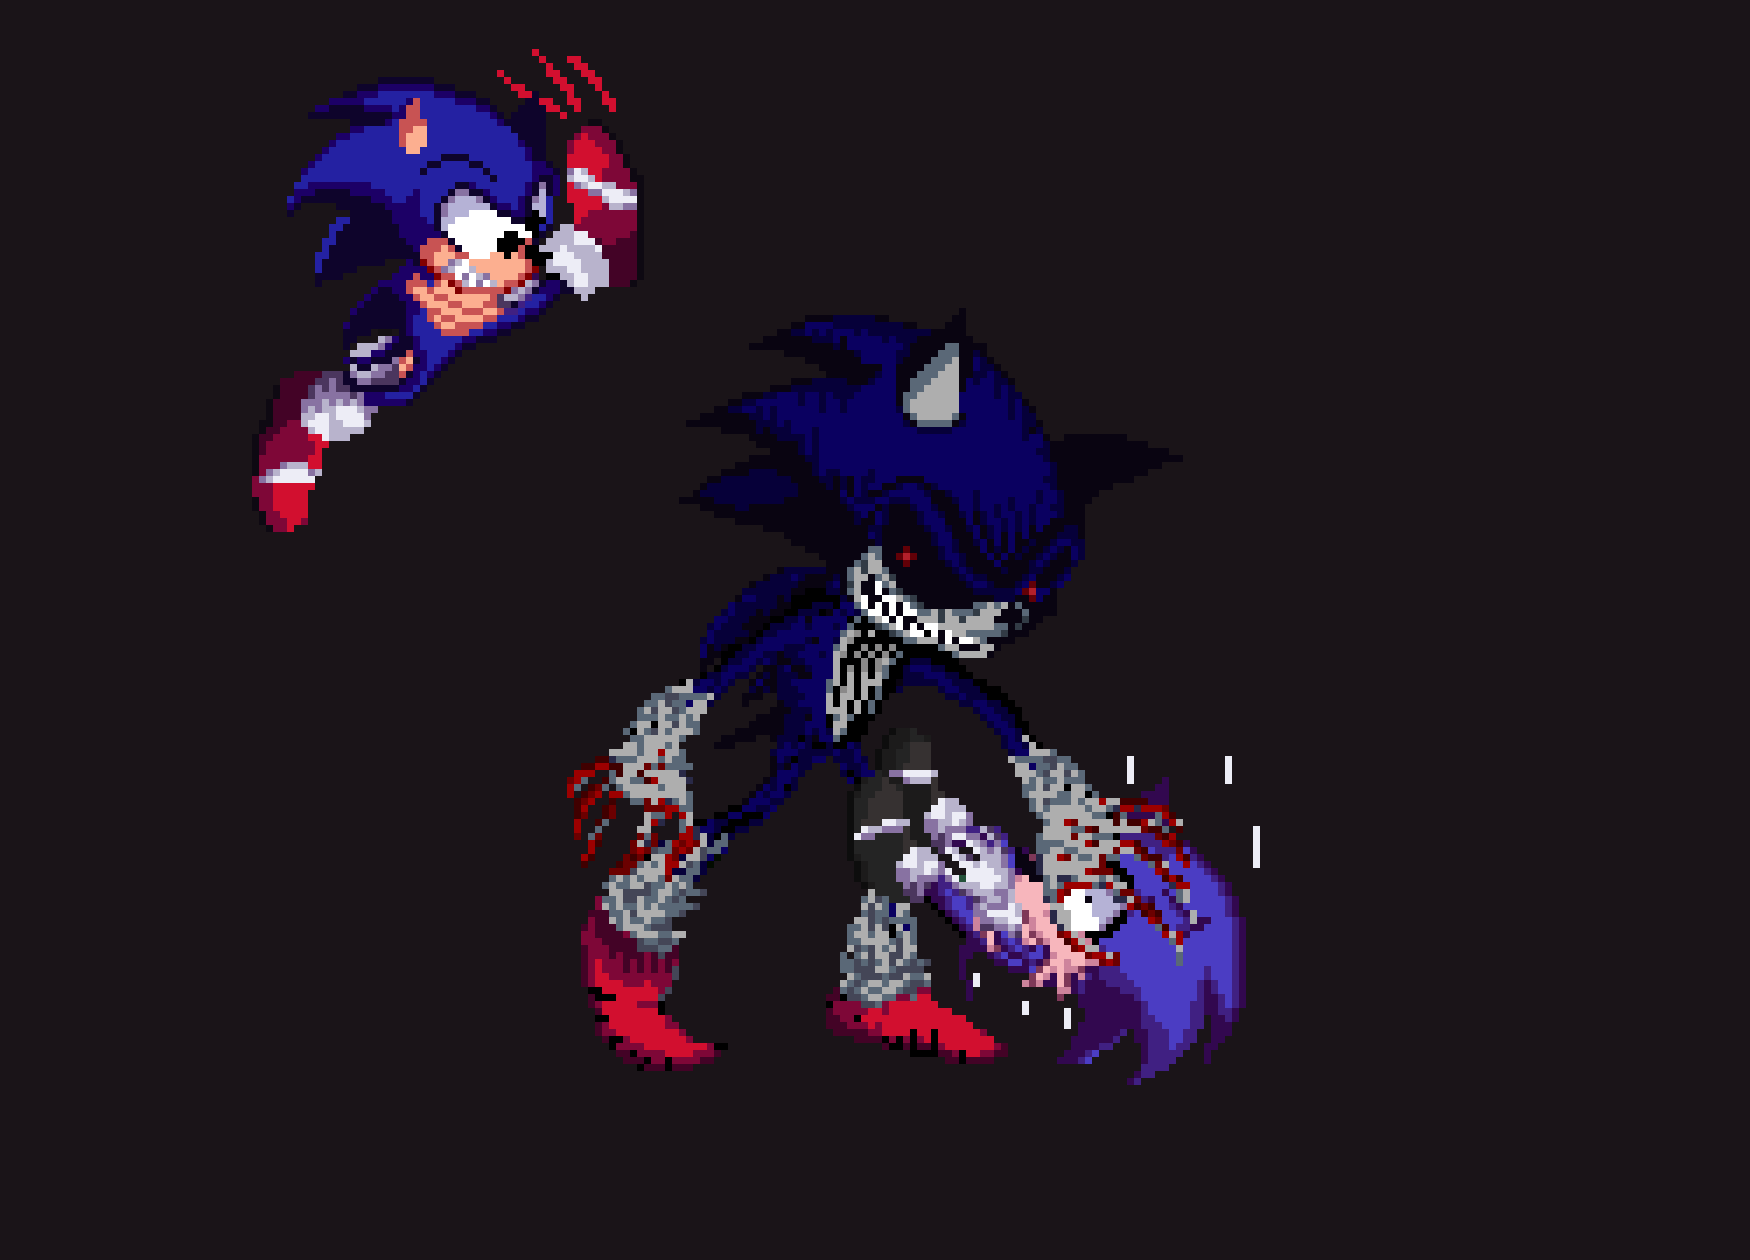 Sonic.exe part 3